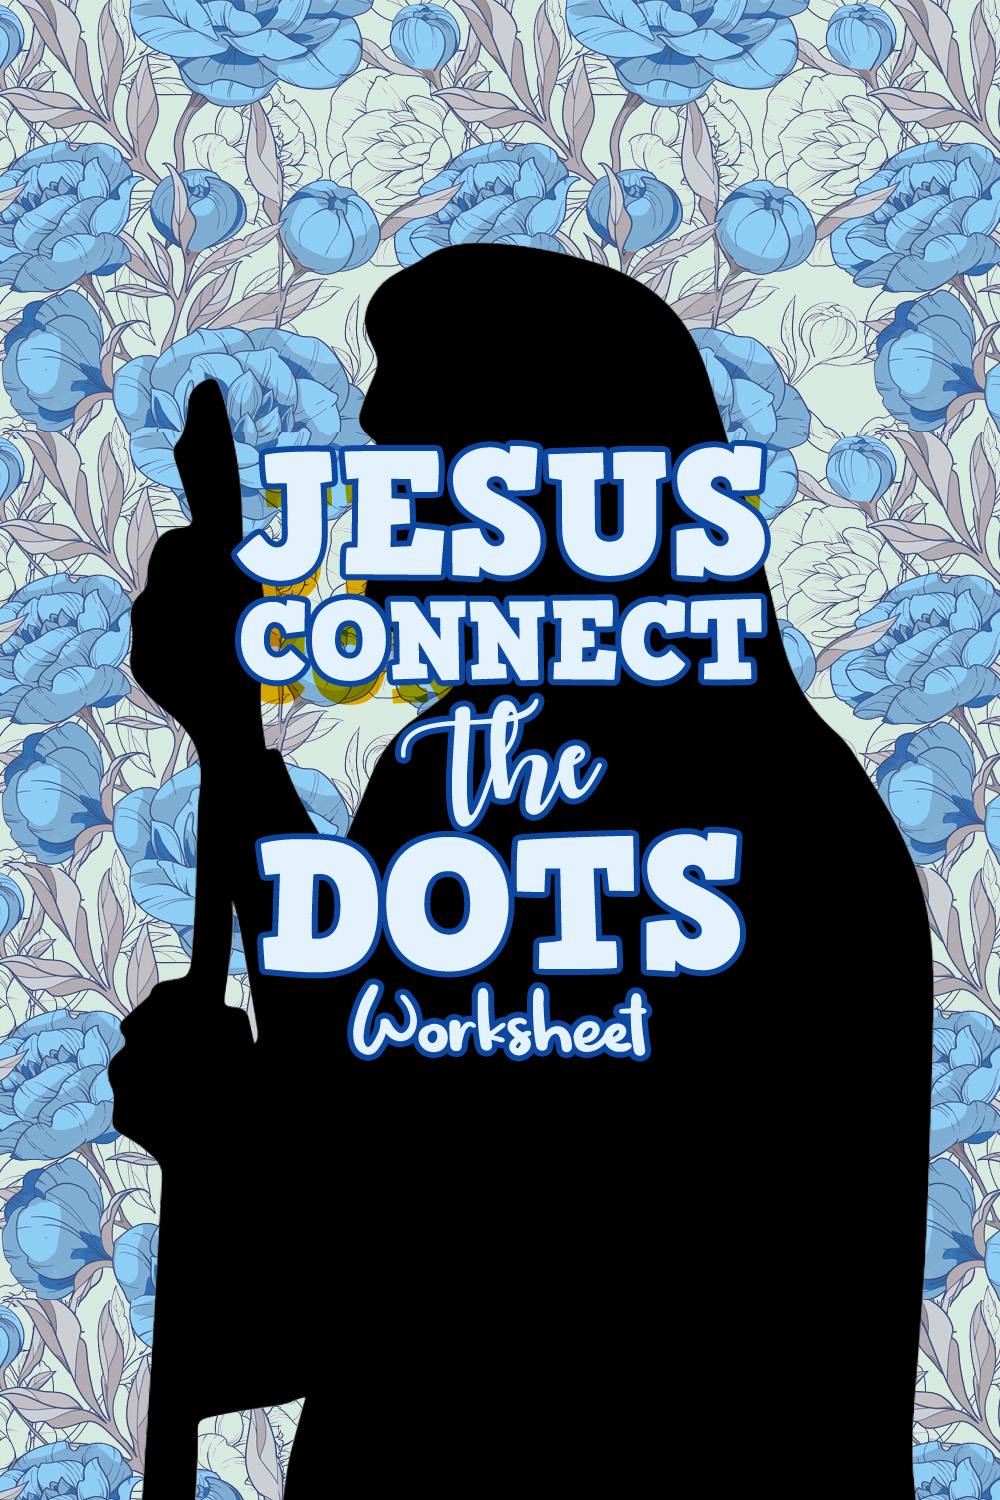 12 Images of Jesus Connect The Dots Worksheets